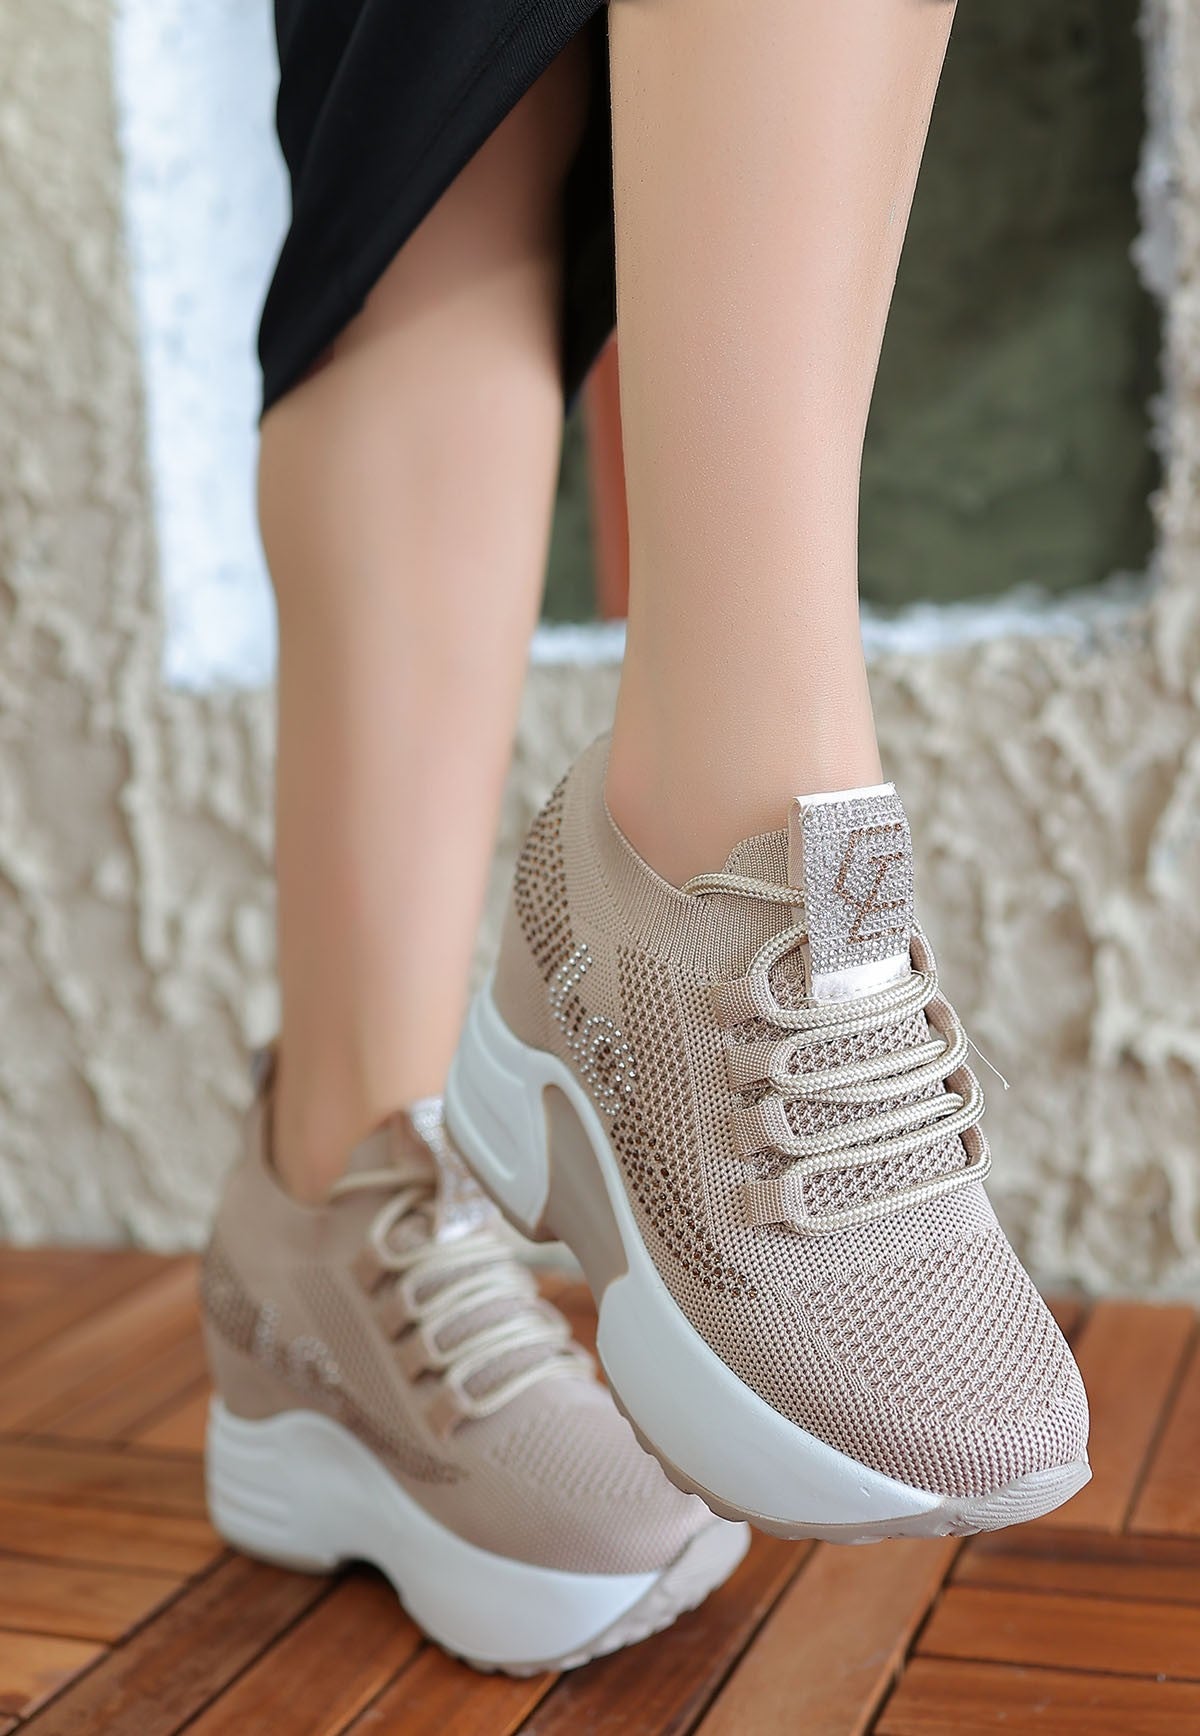 Women's Nude Skin Lace-Up Sports Shoes